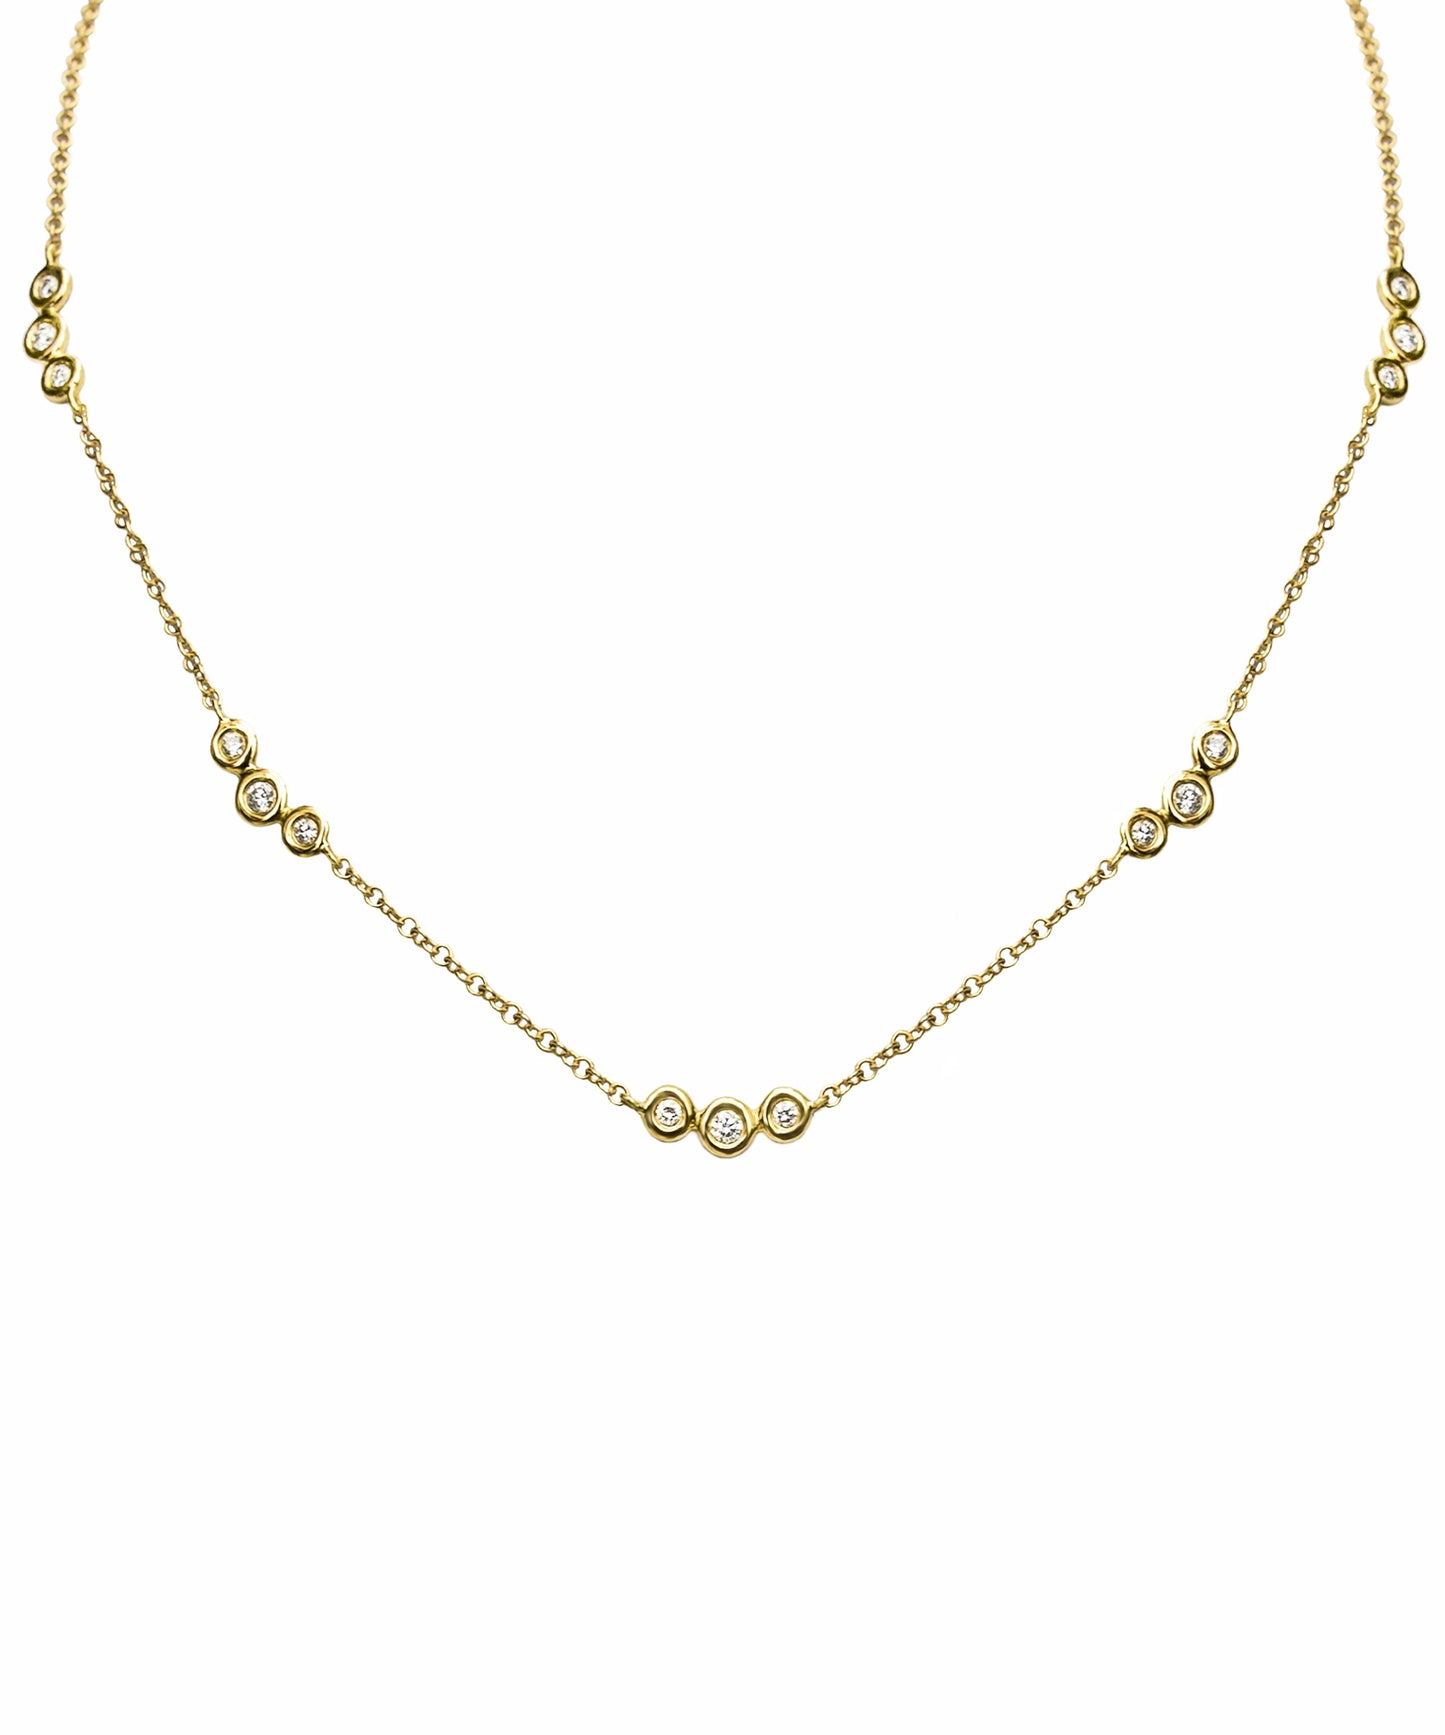 Solid 14k gold 15 diamond necklace